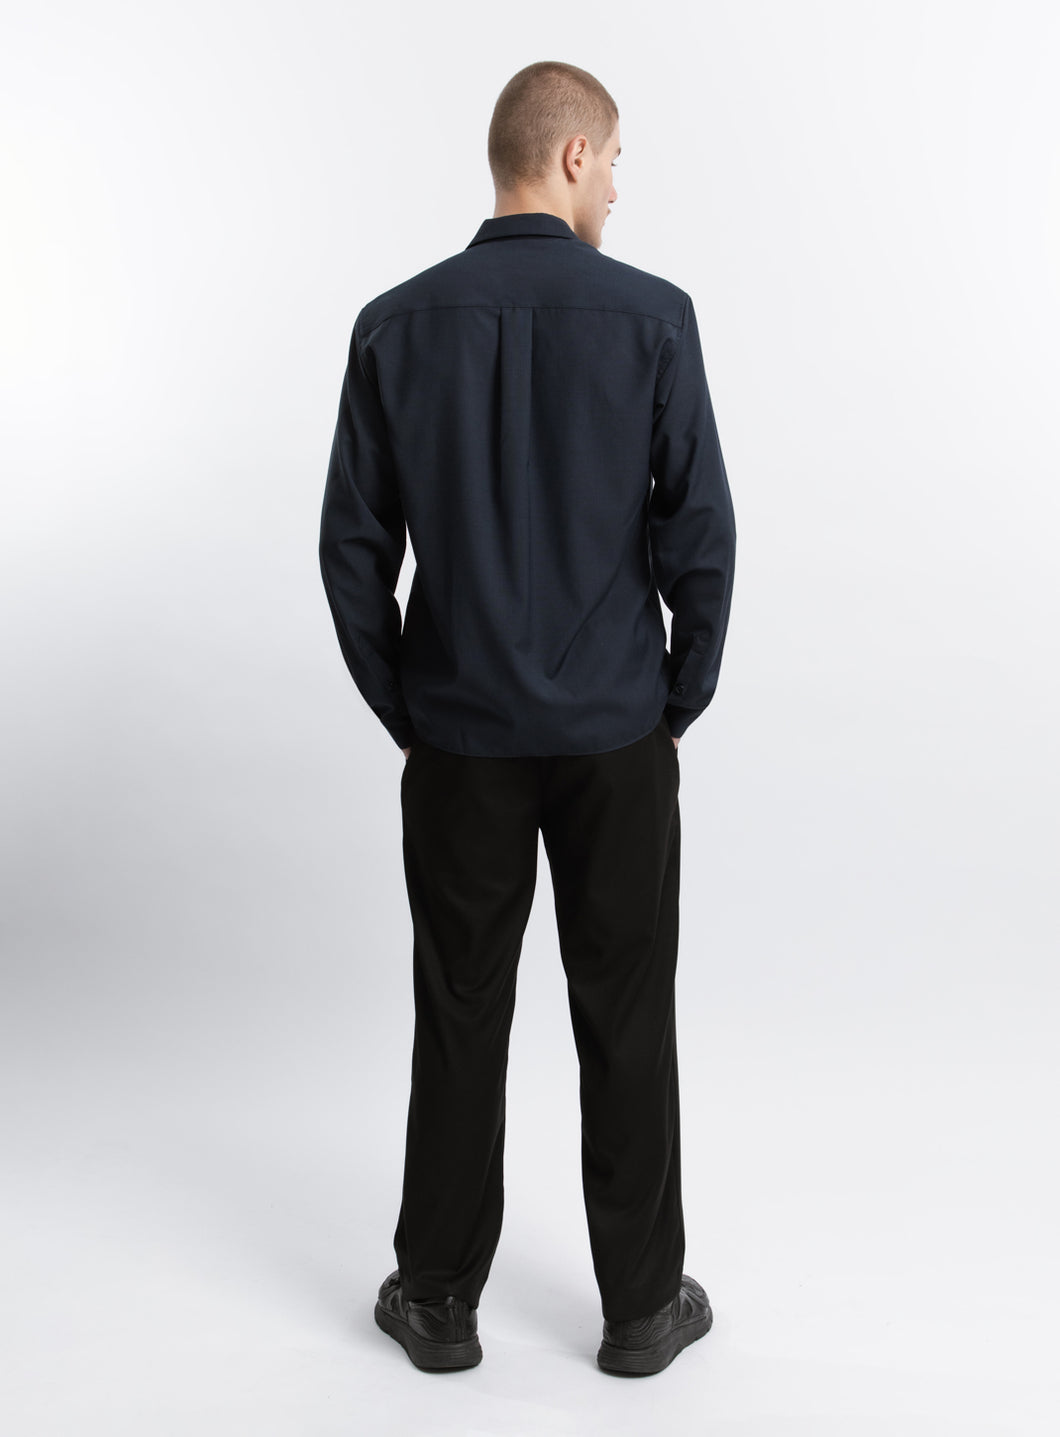 Overshirt with Tailored Collar in Navy Blue Serge